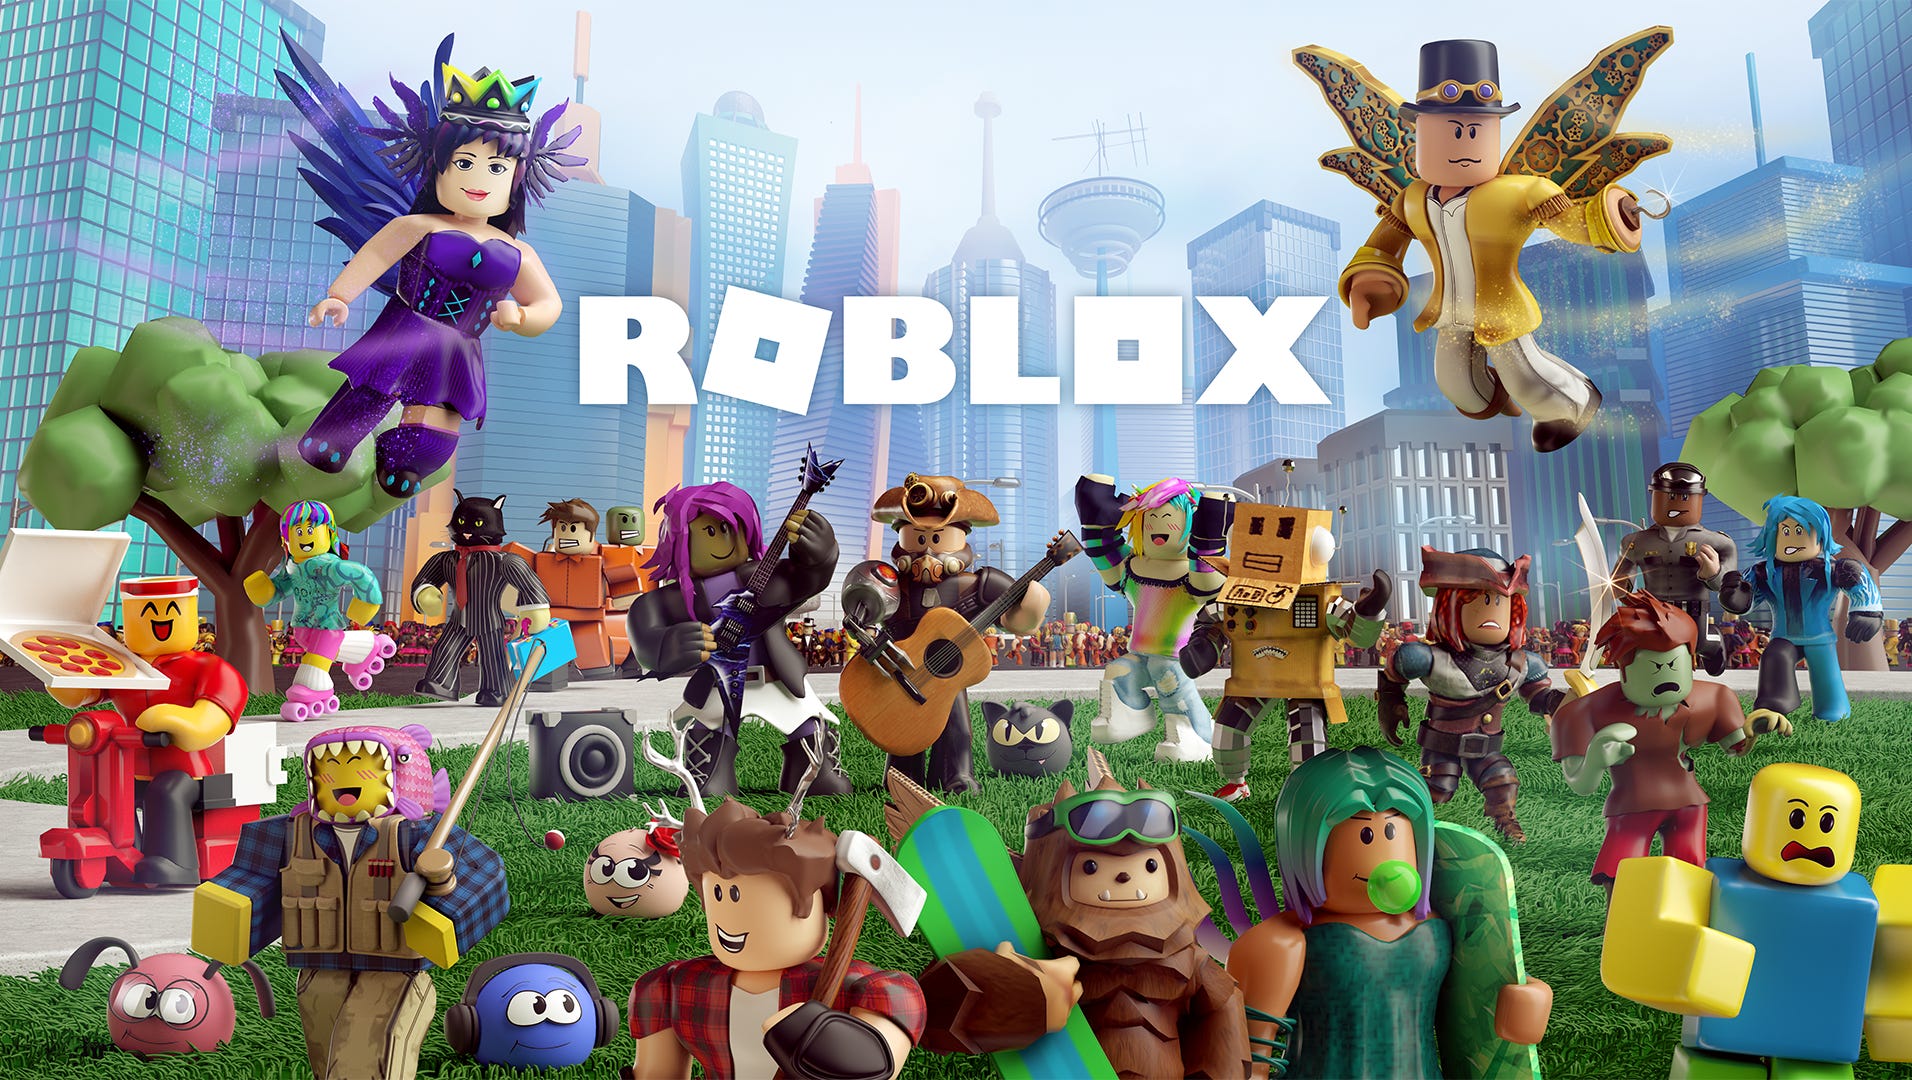 Roblox Kids Game Shows Character Being Sexually Violated Mom Warns - girl characters roblox